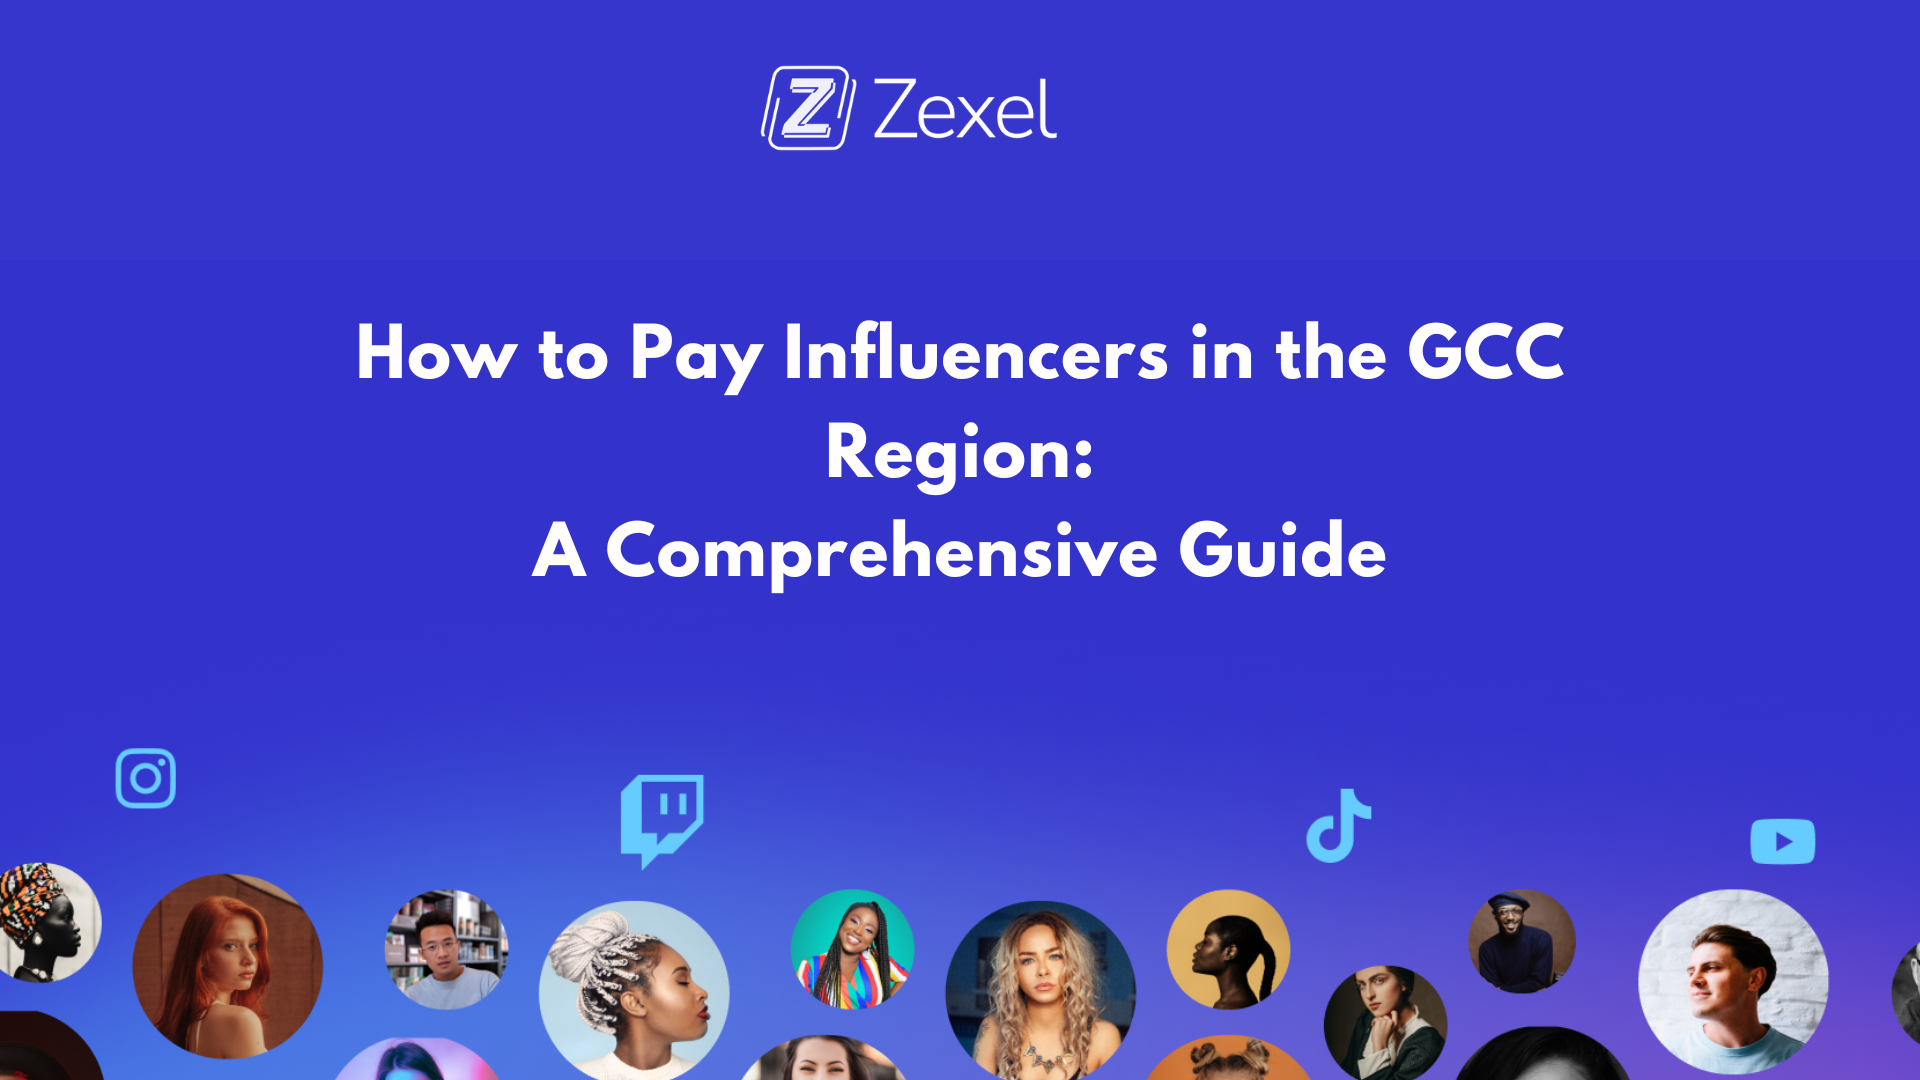 How to pay Influencers in the GCC Region: Essential Guide for Brands